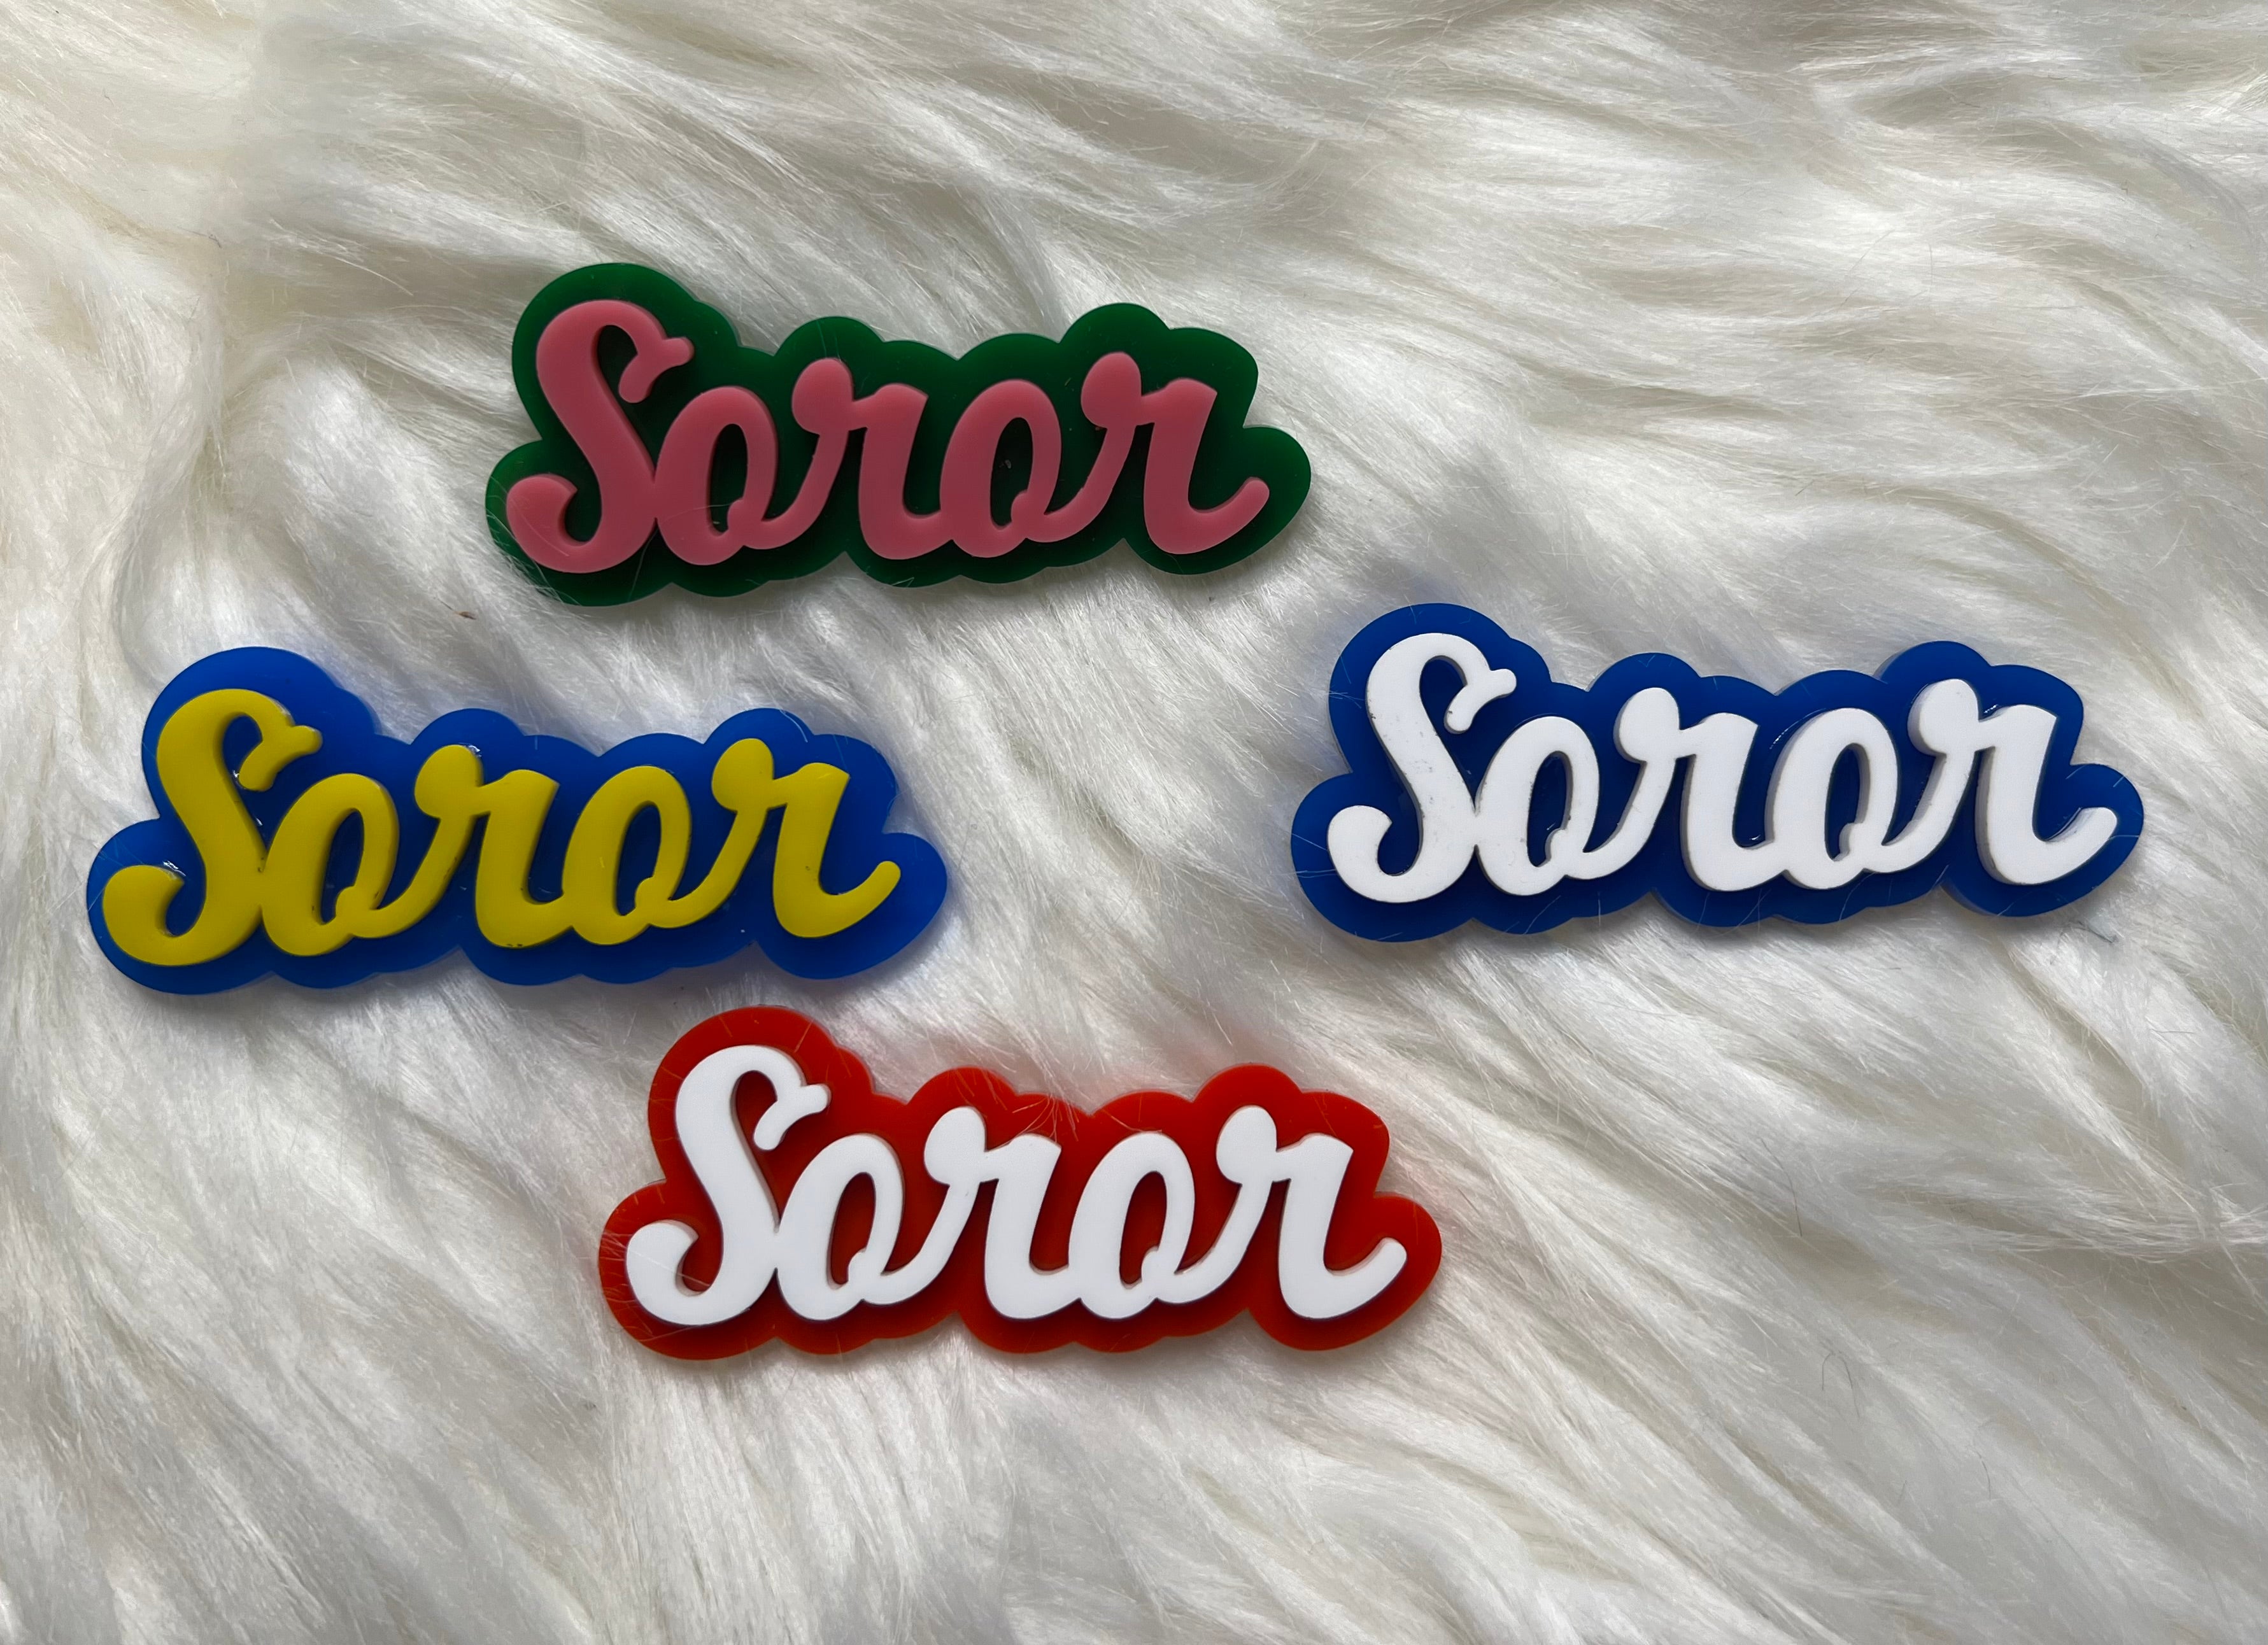 Sorors' and Chapter Acrylic Pins